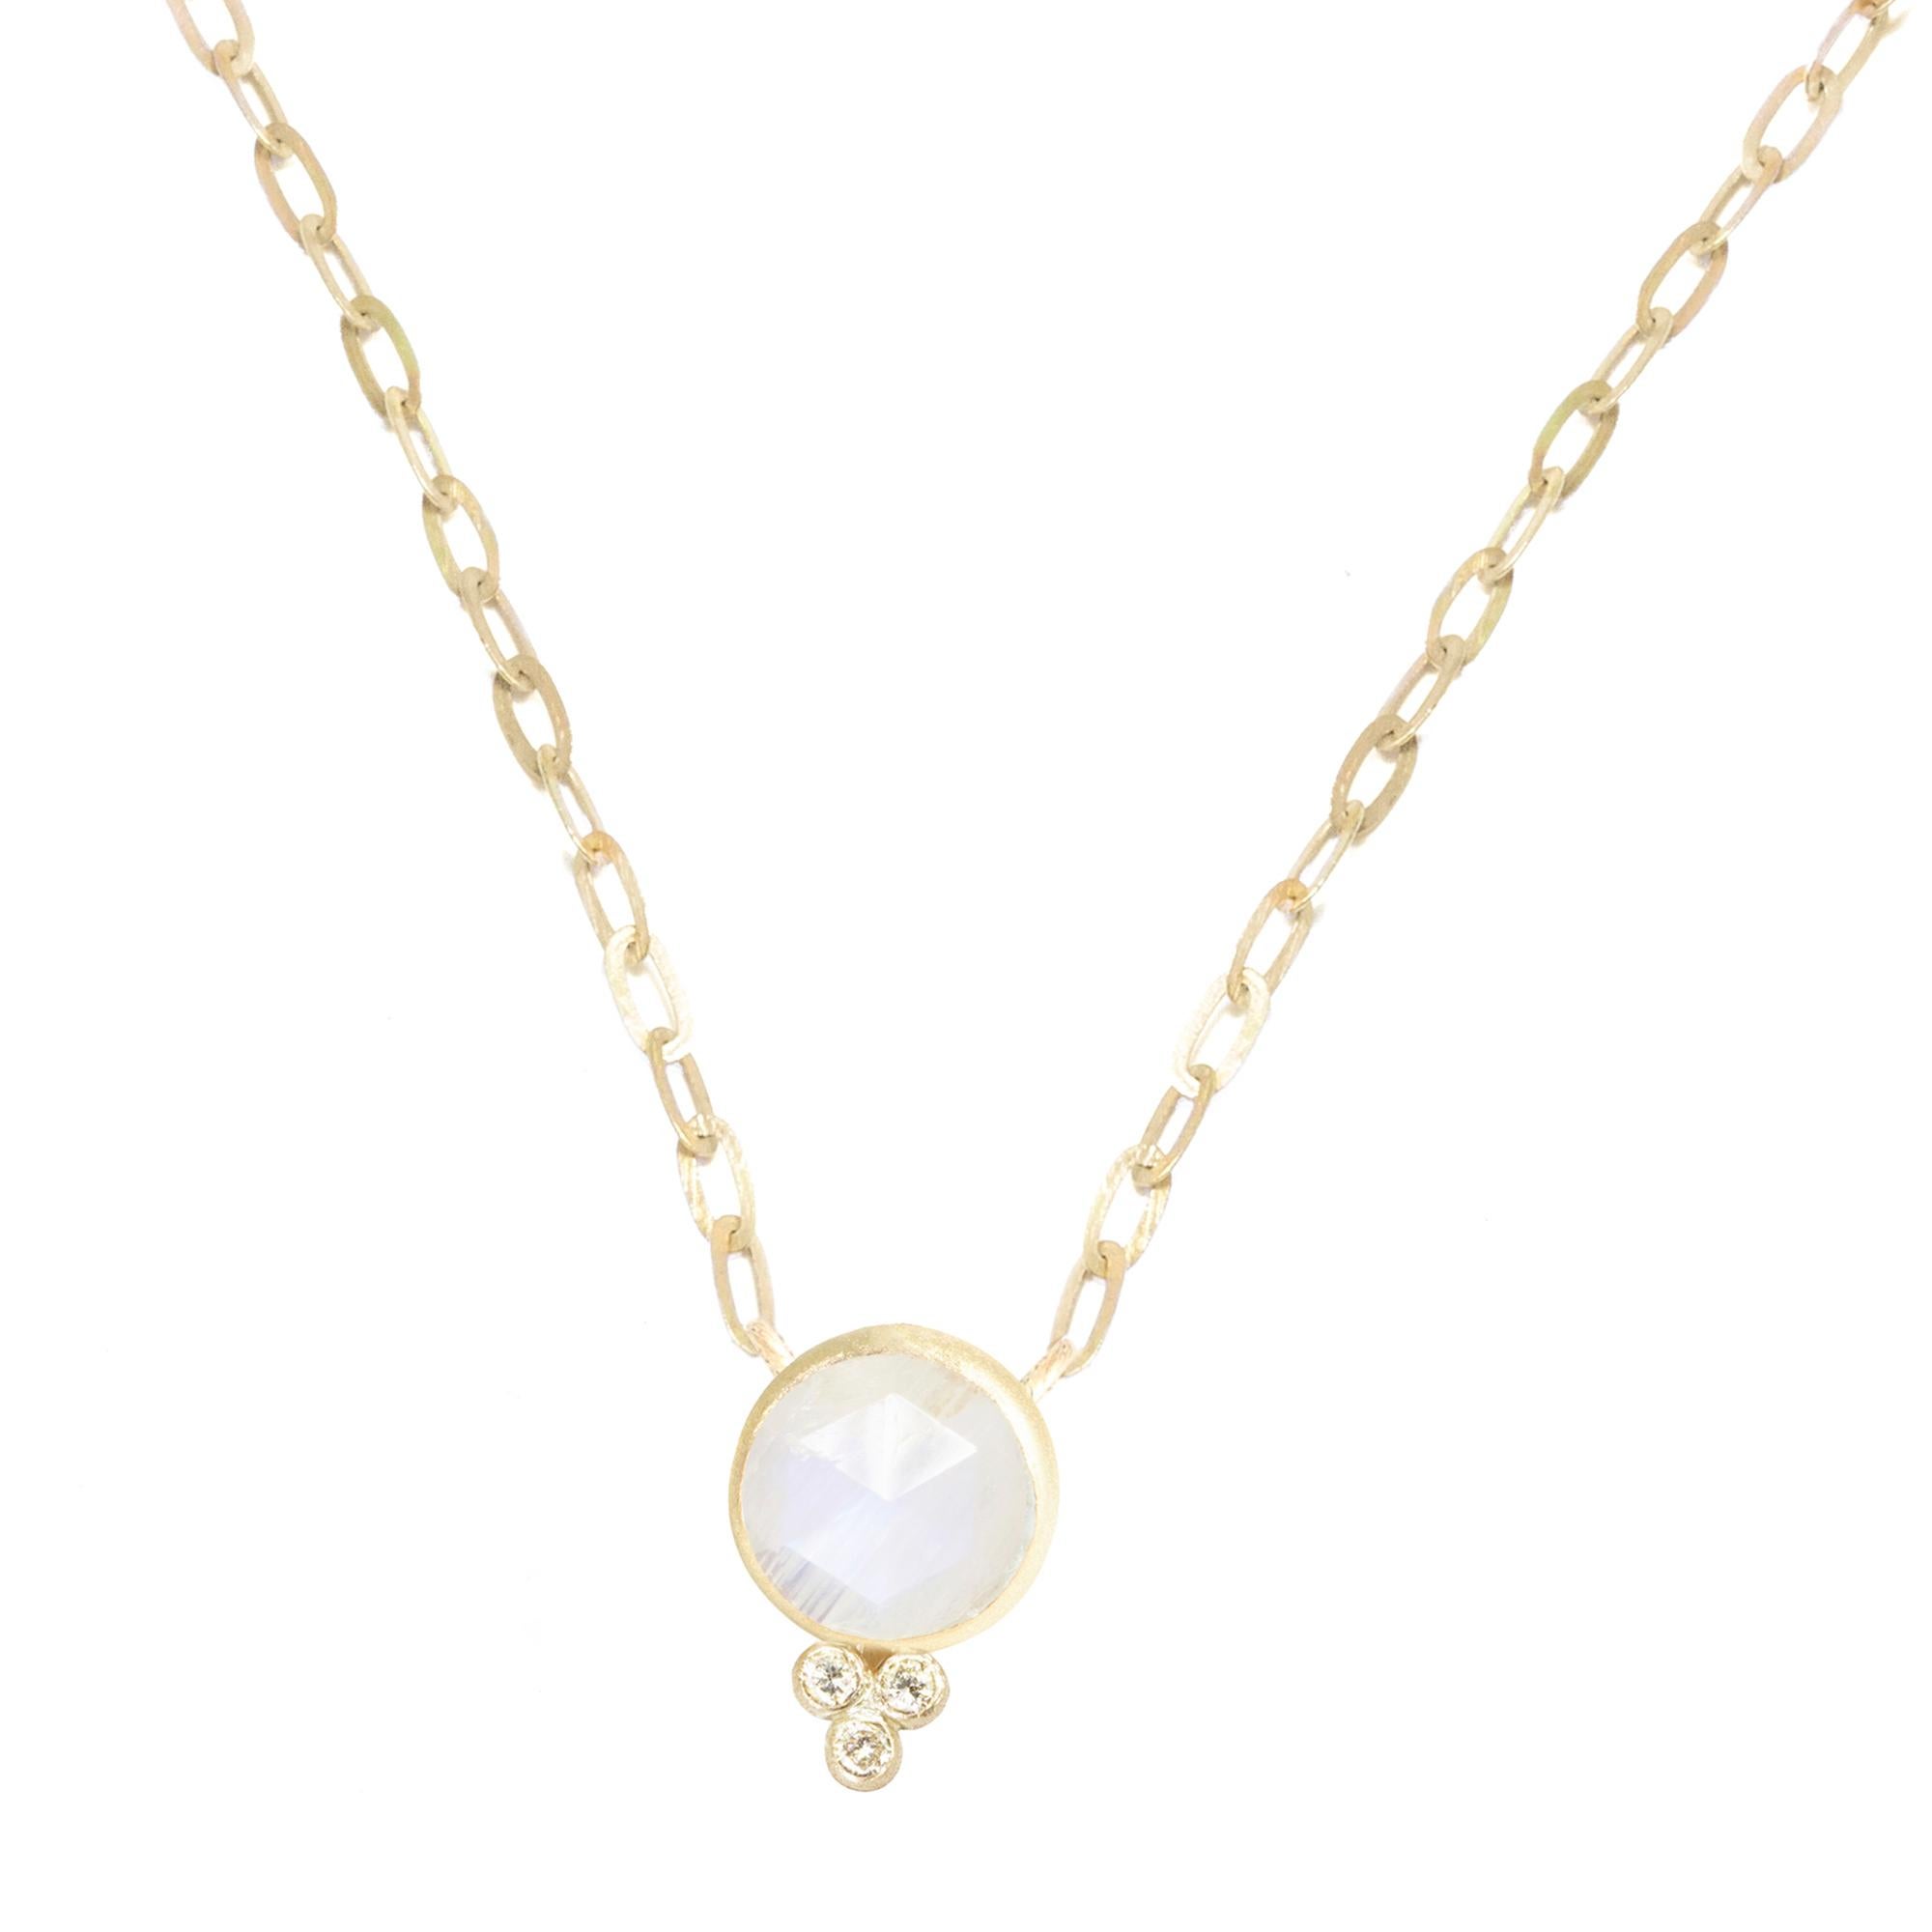 Square dance: Designed with moonstone in a textured gold bezel on a delicate link chain, our diamond-accented Ariana Gold Necklace can be worn on its own o layered with other styles.

Metal: 18K Yellow Gold
Stone carat: 3.5
Diamond carat: